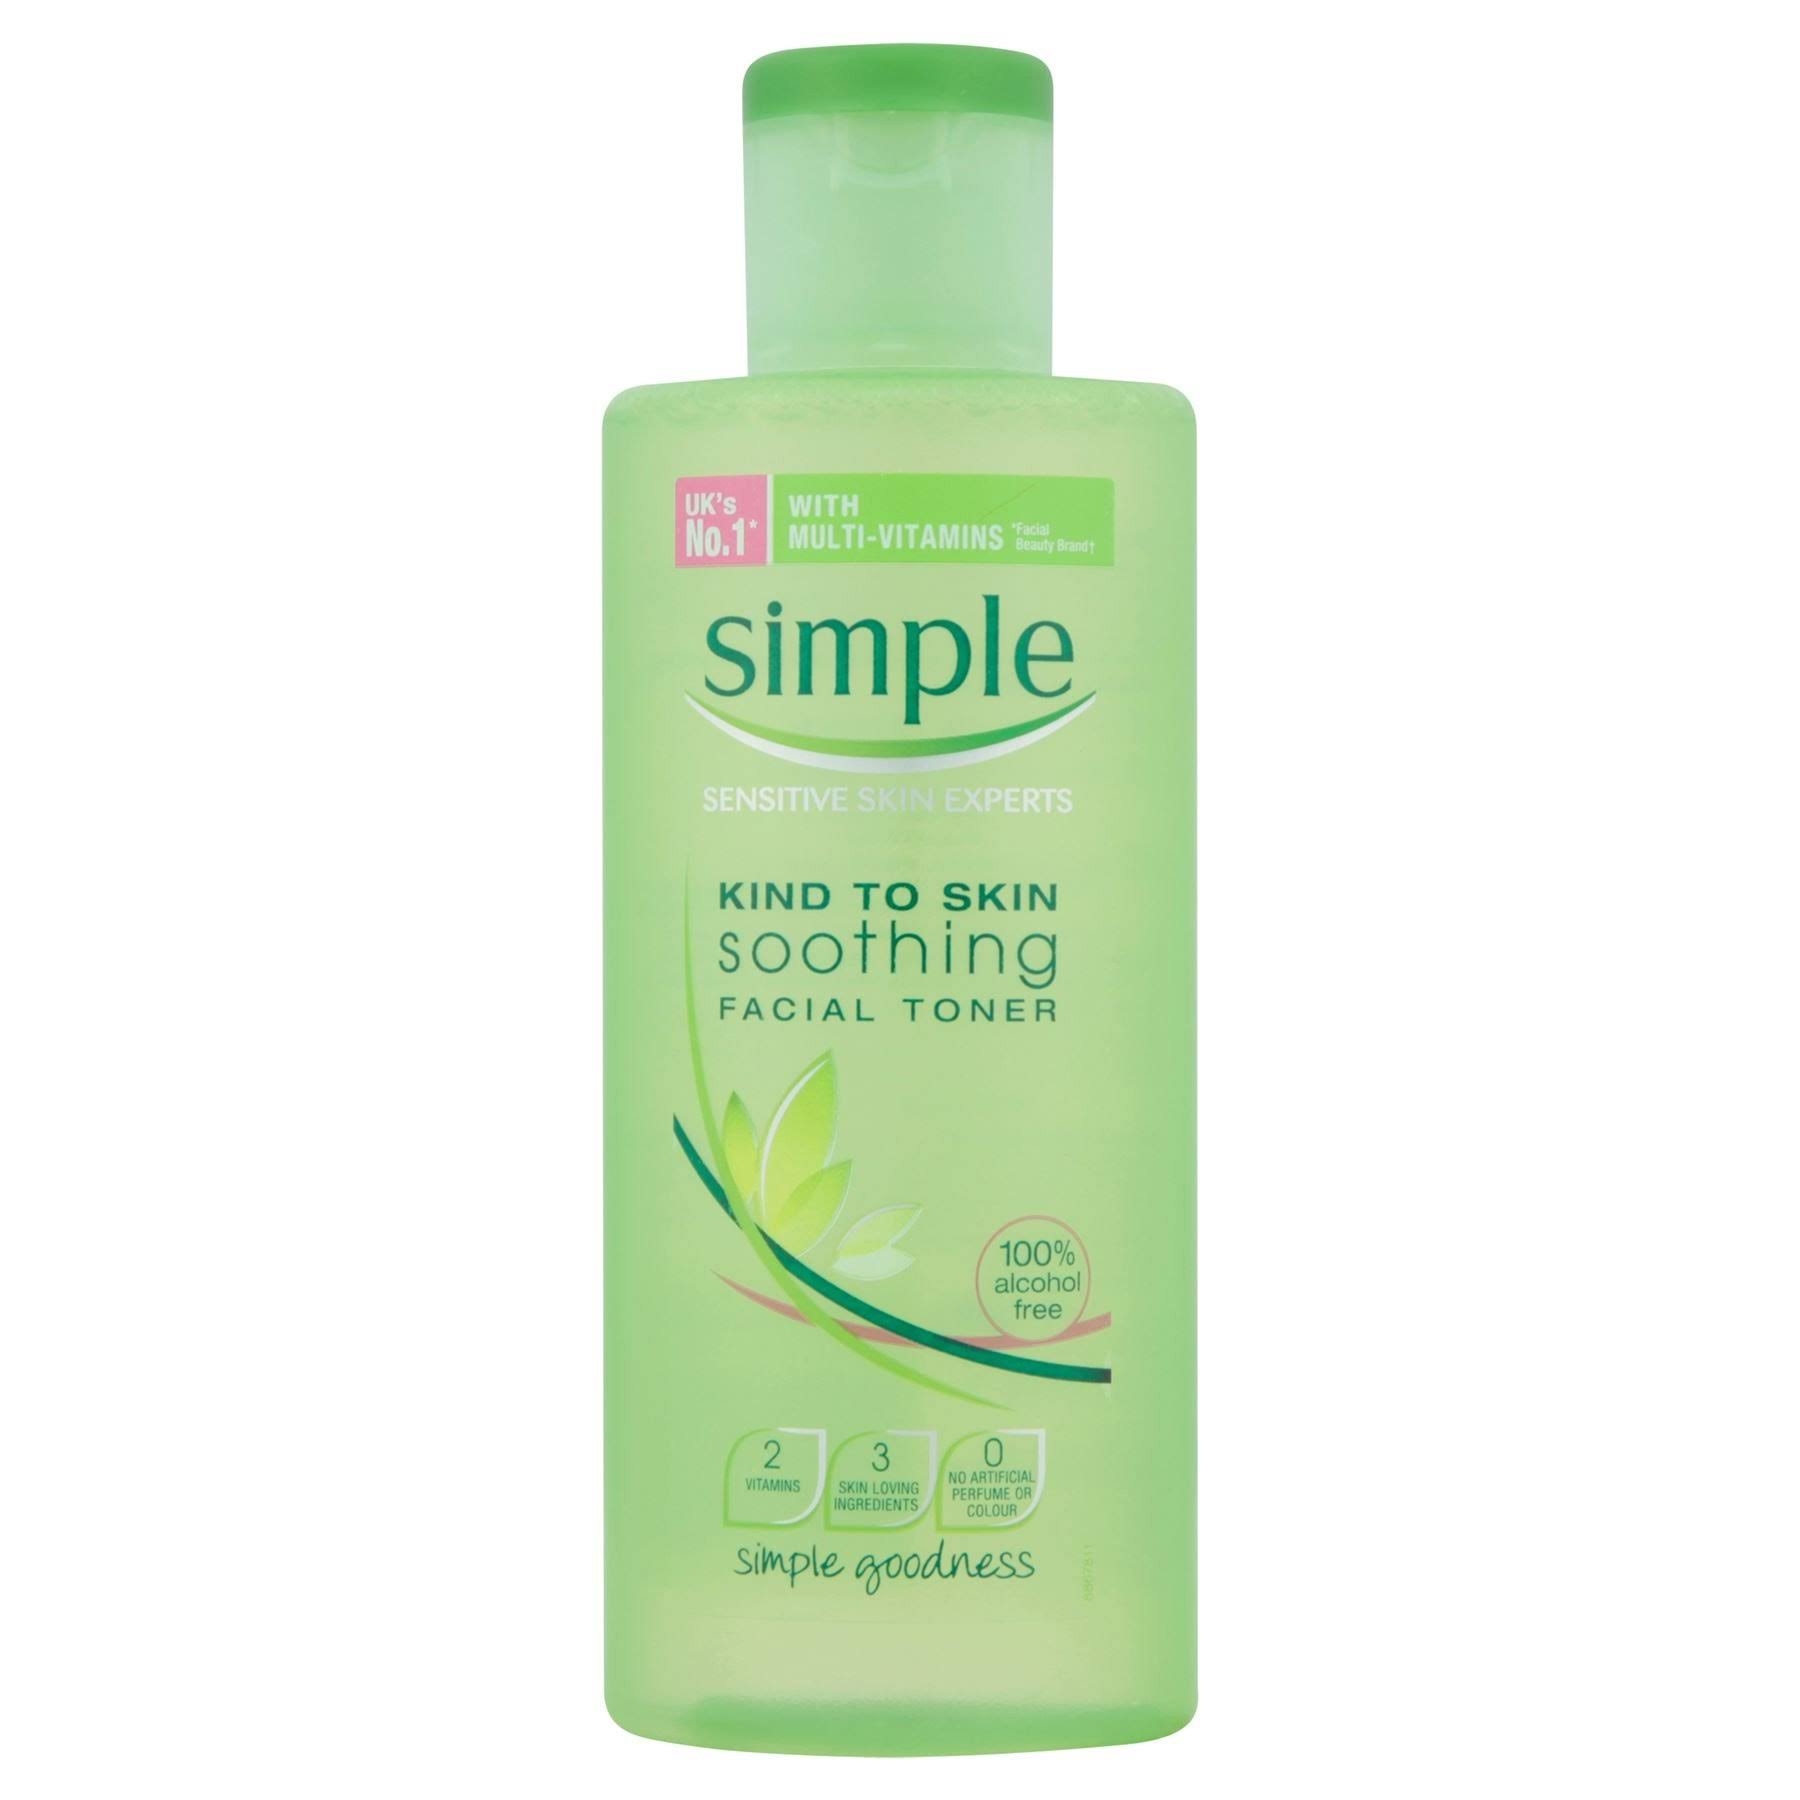 Simple Soothing Facial Toner - 200ml